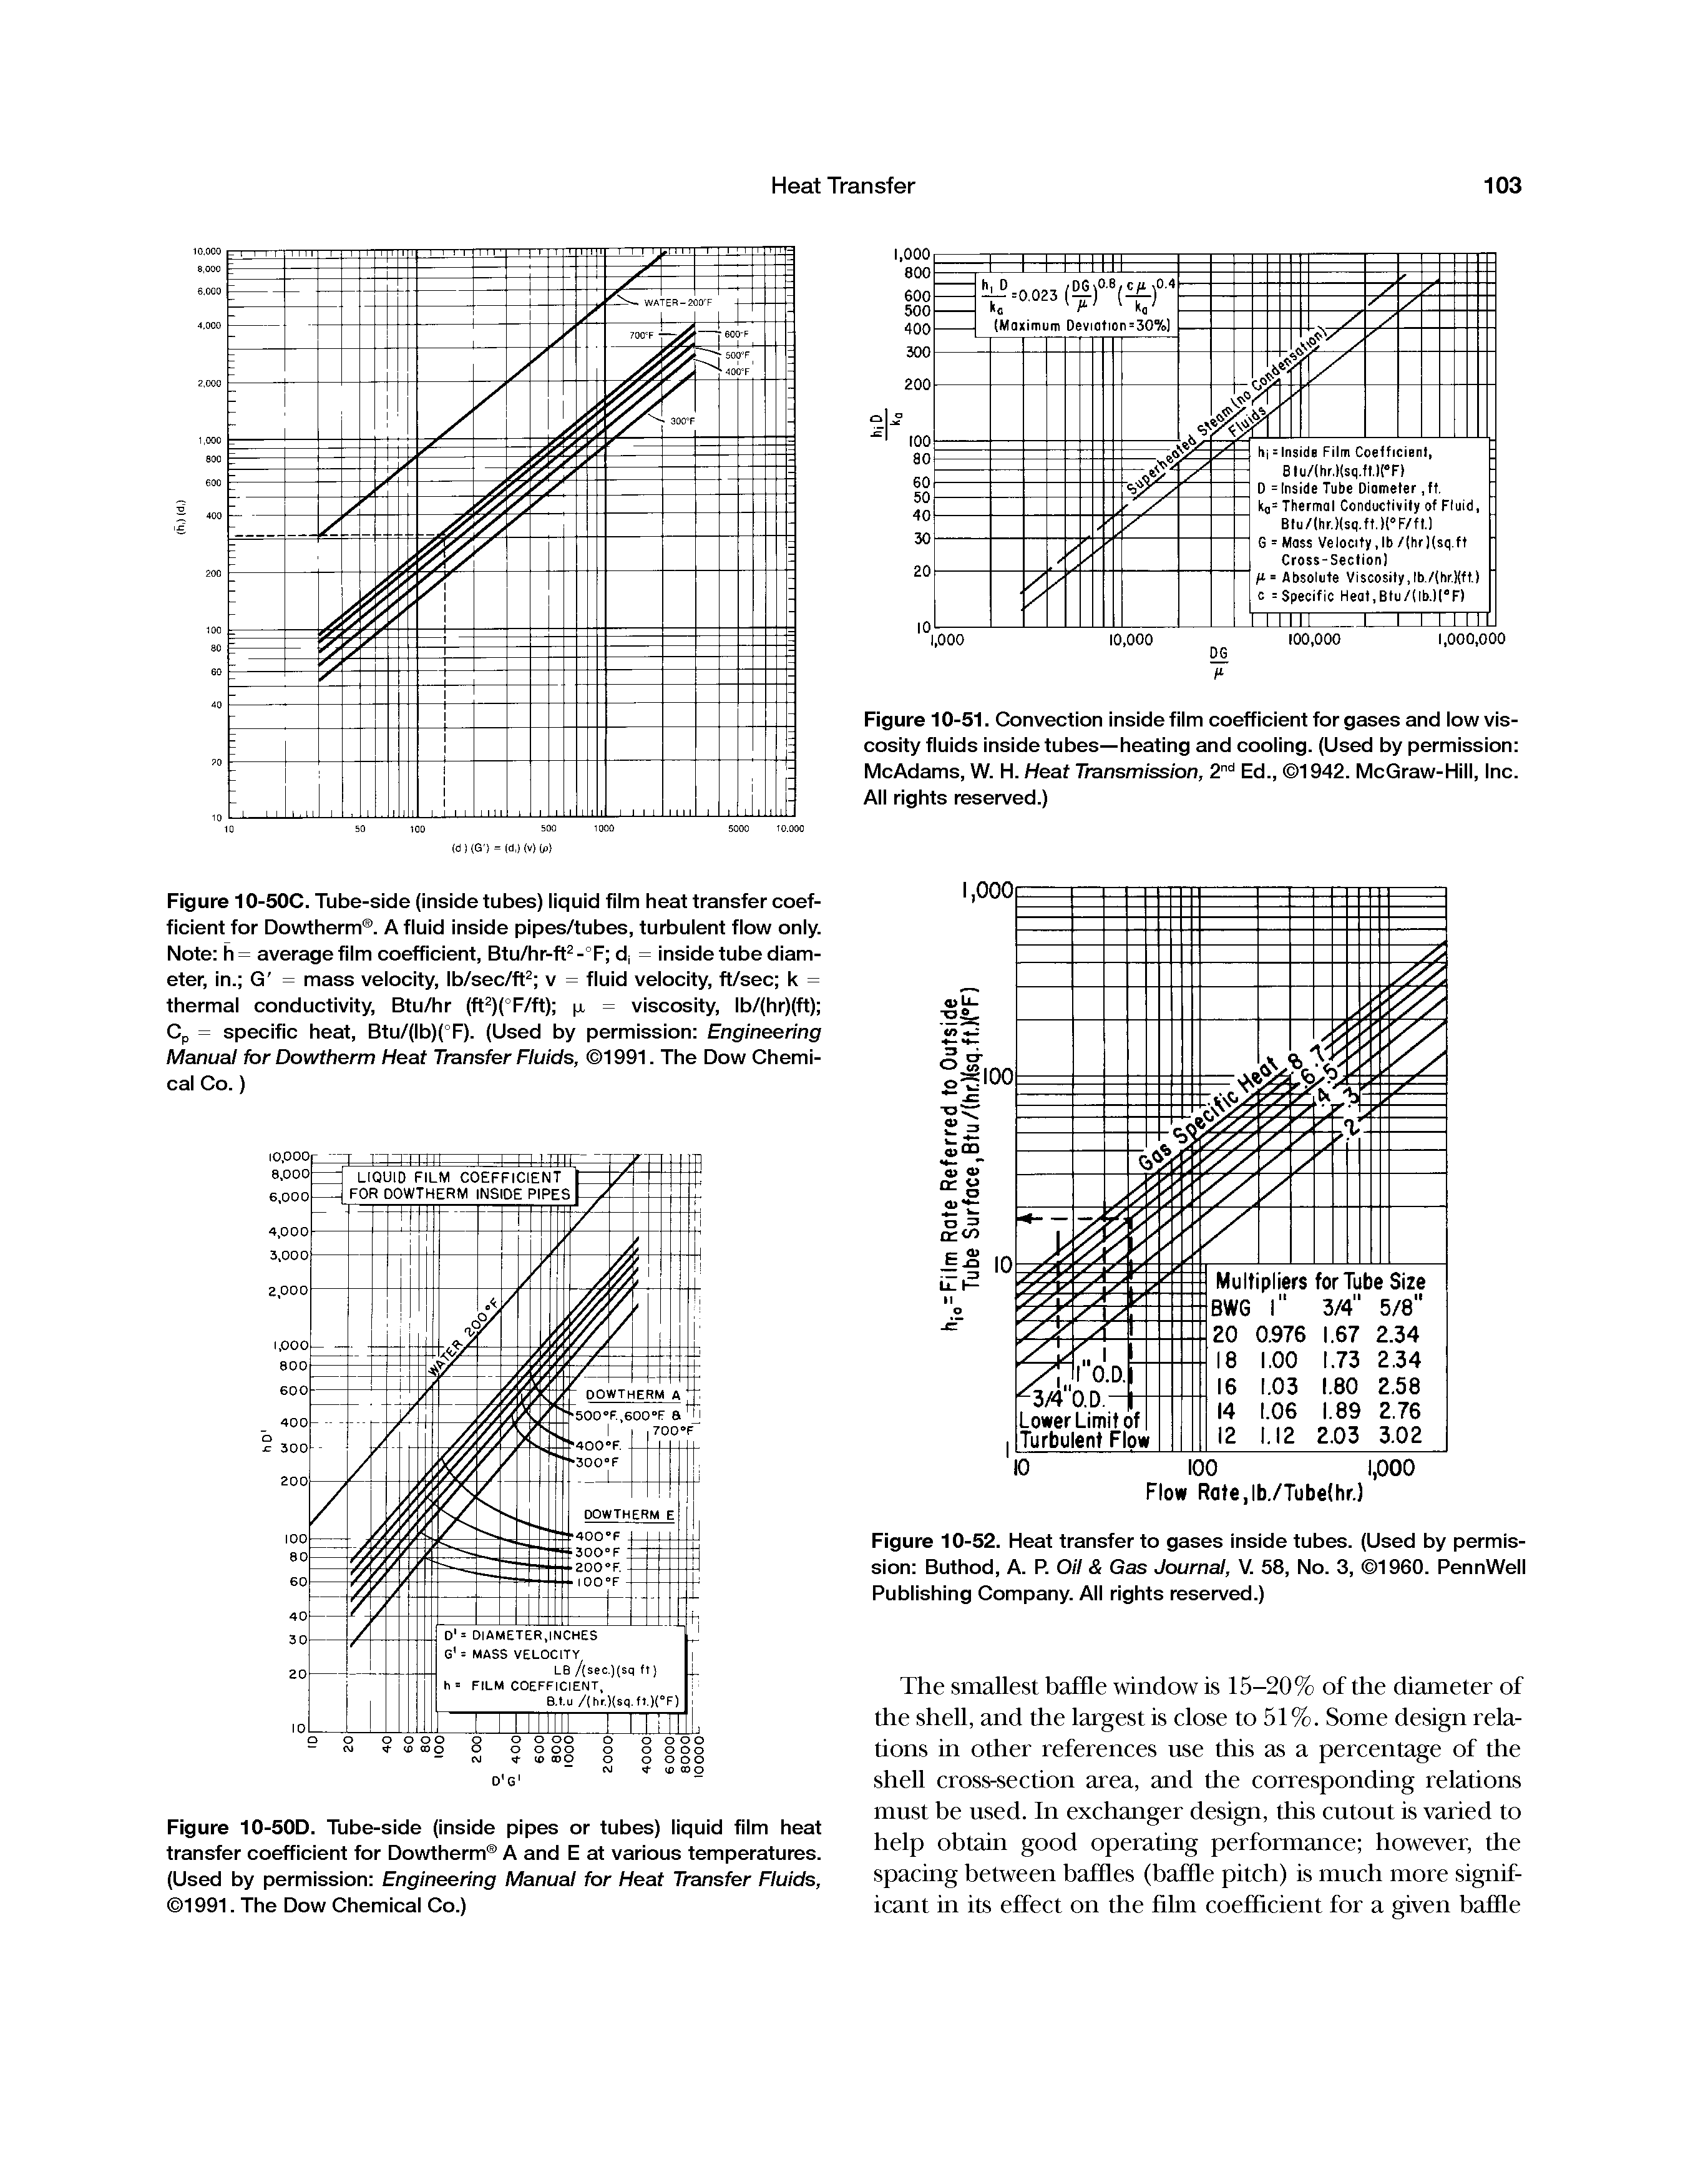 Figure 10-50C. Tube-side (inside tubes) liquid film heat transfer coefficient for Dowtherm . A fluid inside pipes/tubes, turbulent flow only. Note h= average film coefficient, Btu/hr-ft -°F d = inside tube diameter, in. G = mass velocity, Ib/sec/ft v = fluid velocity, ft/sec k = thermal conductivity, Btu/hr (ft )(°F/ft) n, = viscosity, lb/(hr)(ft) Cp = specific heat, Btu/(lb)(°F). (Used by permission Engineering Manual for Dowtherm Heat Transfer Fluids, 1991. The Dow Chemical Co.)...